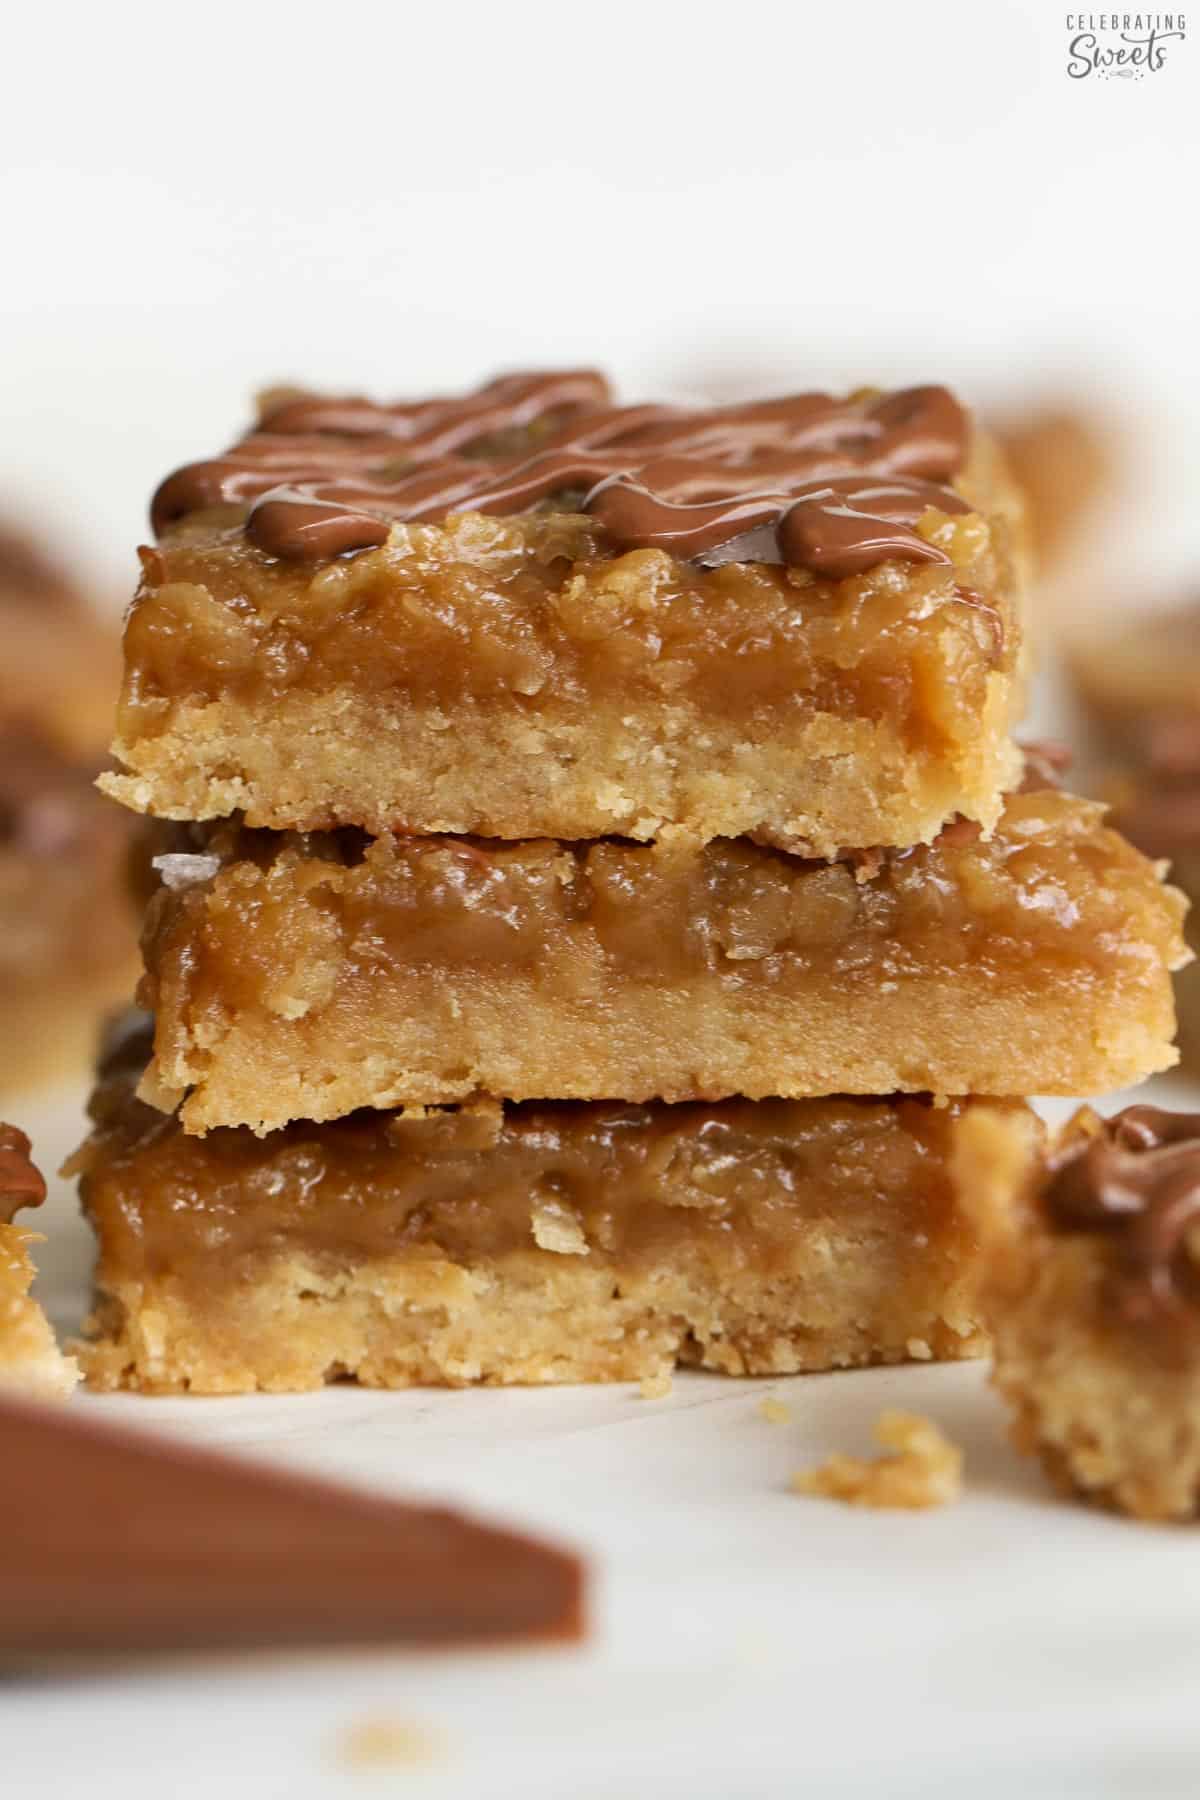 Stack of three caramel coconut bars on parchment paper.